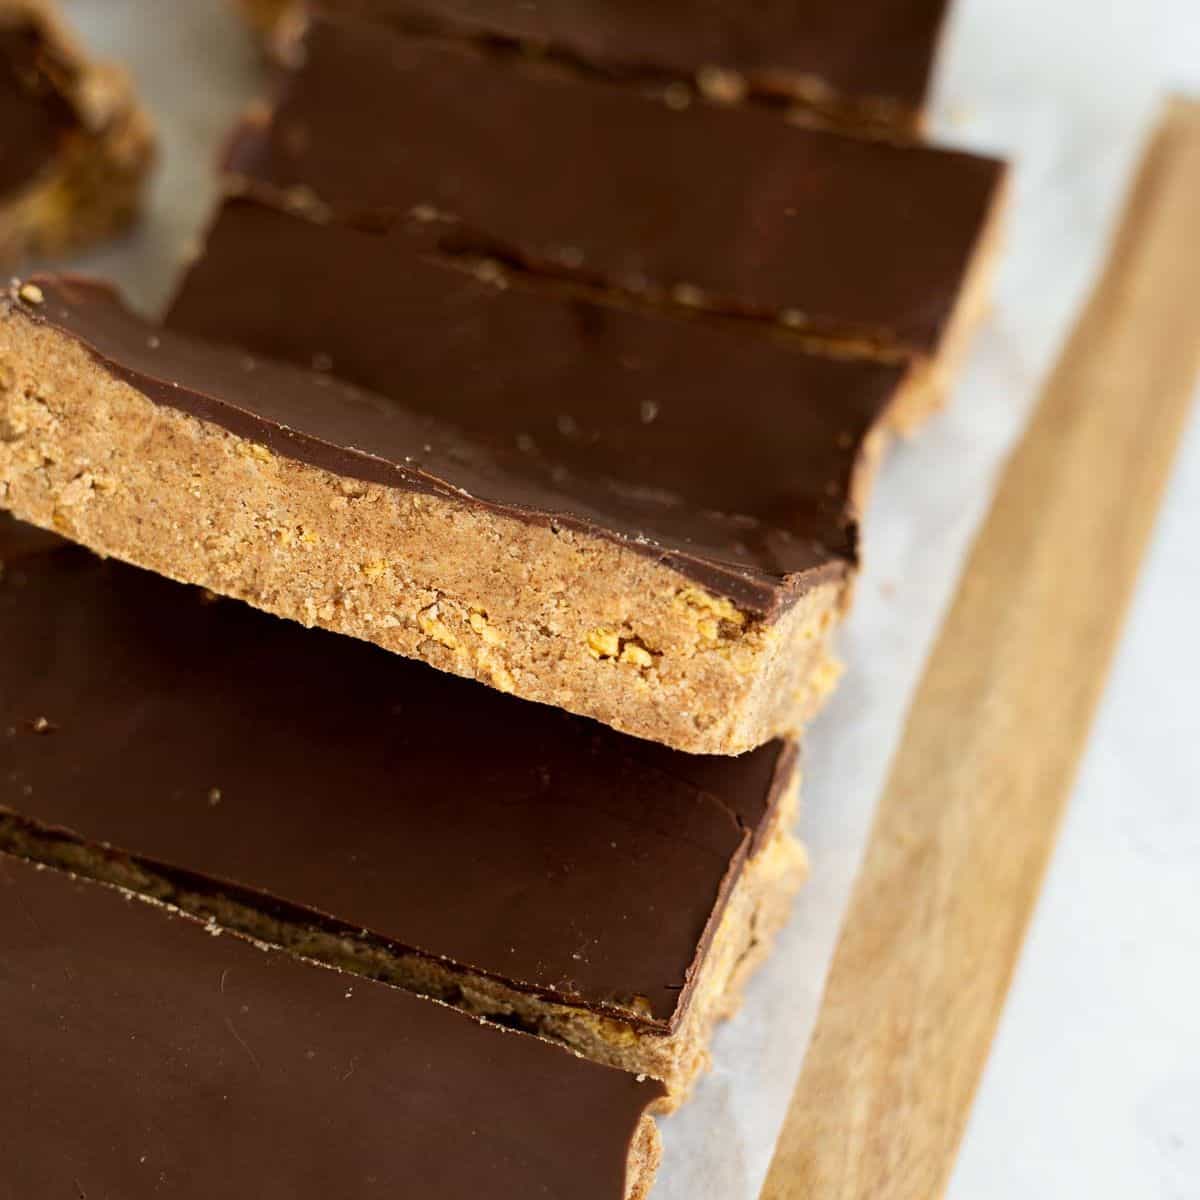 gluten free protein bars cut into rectangles on parchment paper.